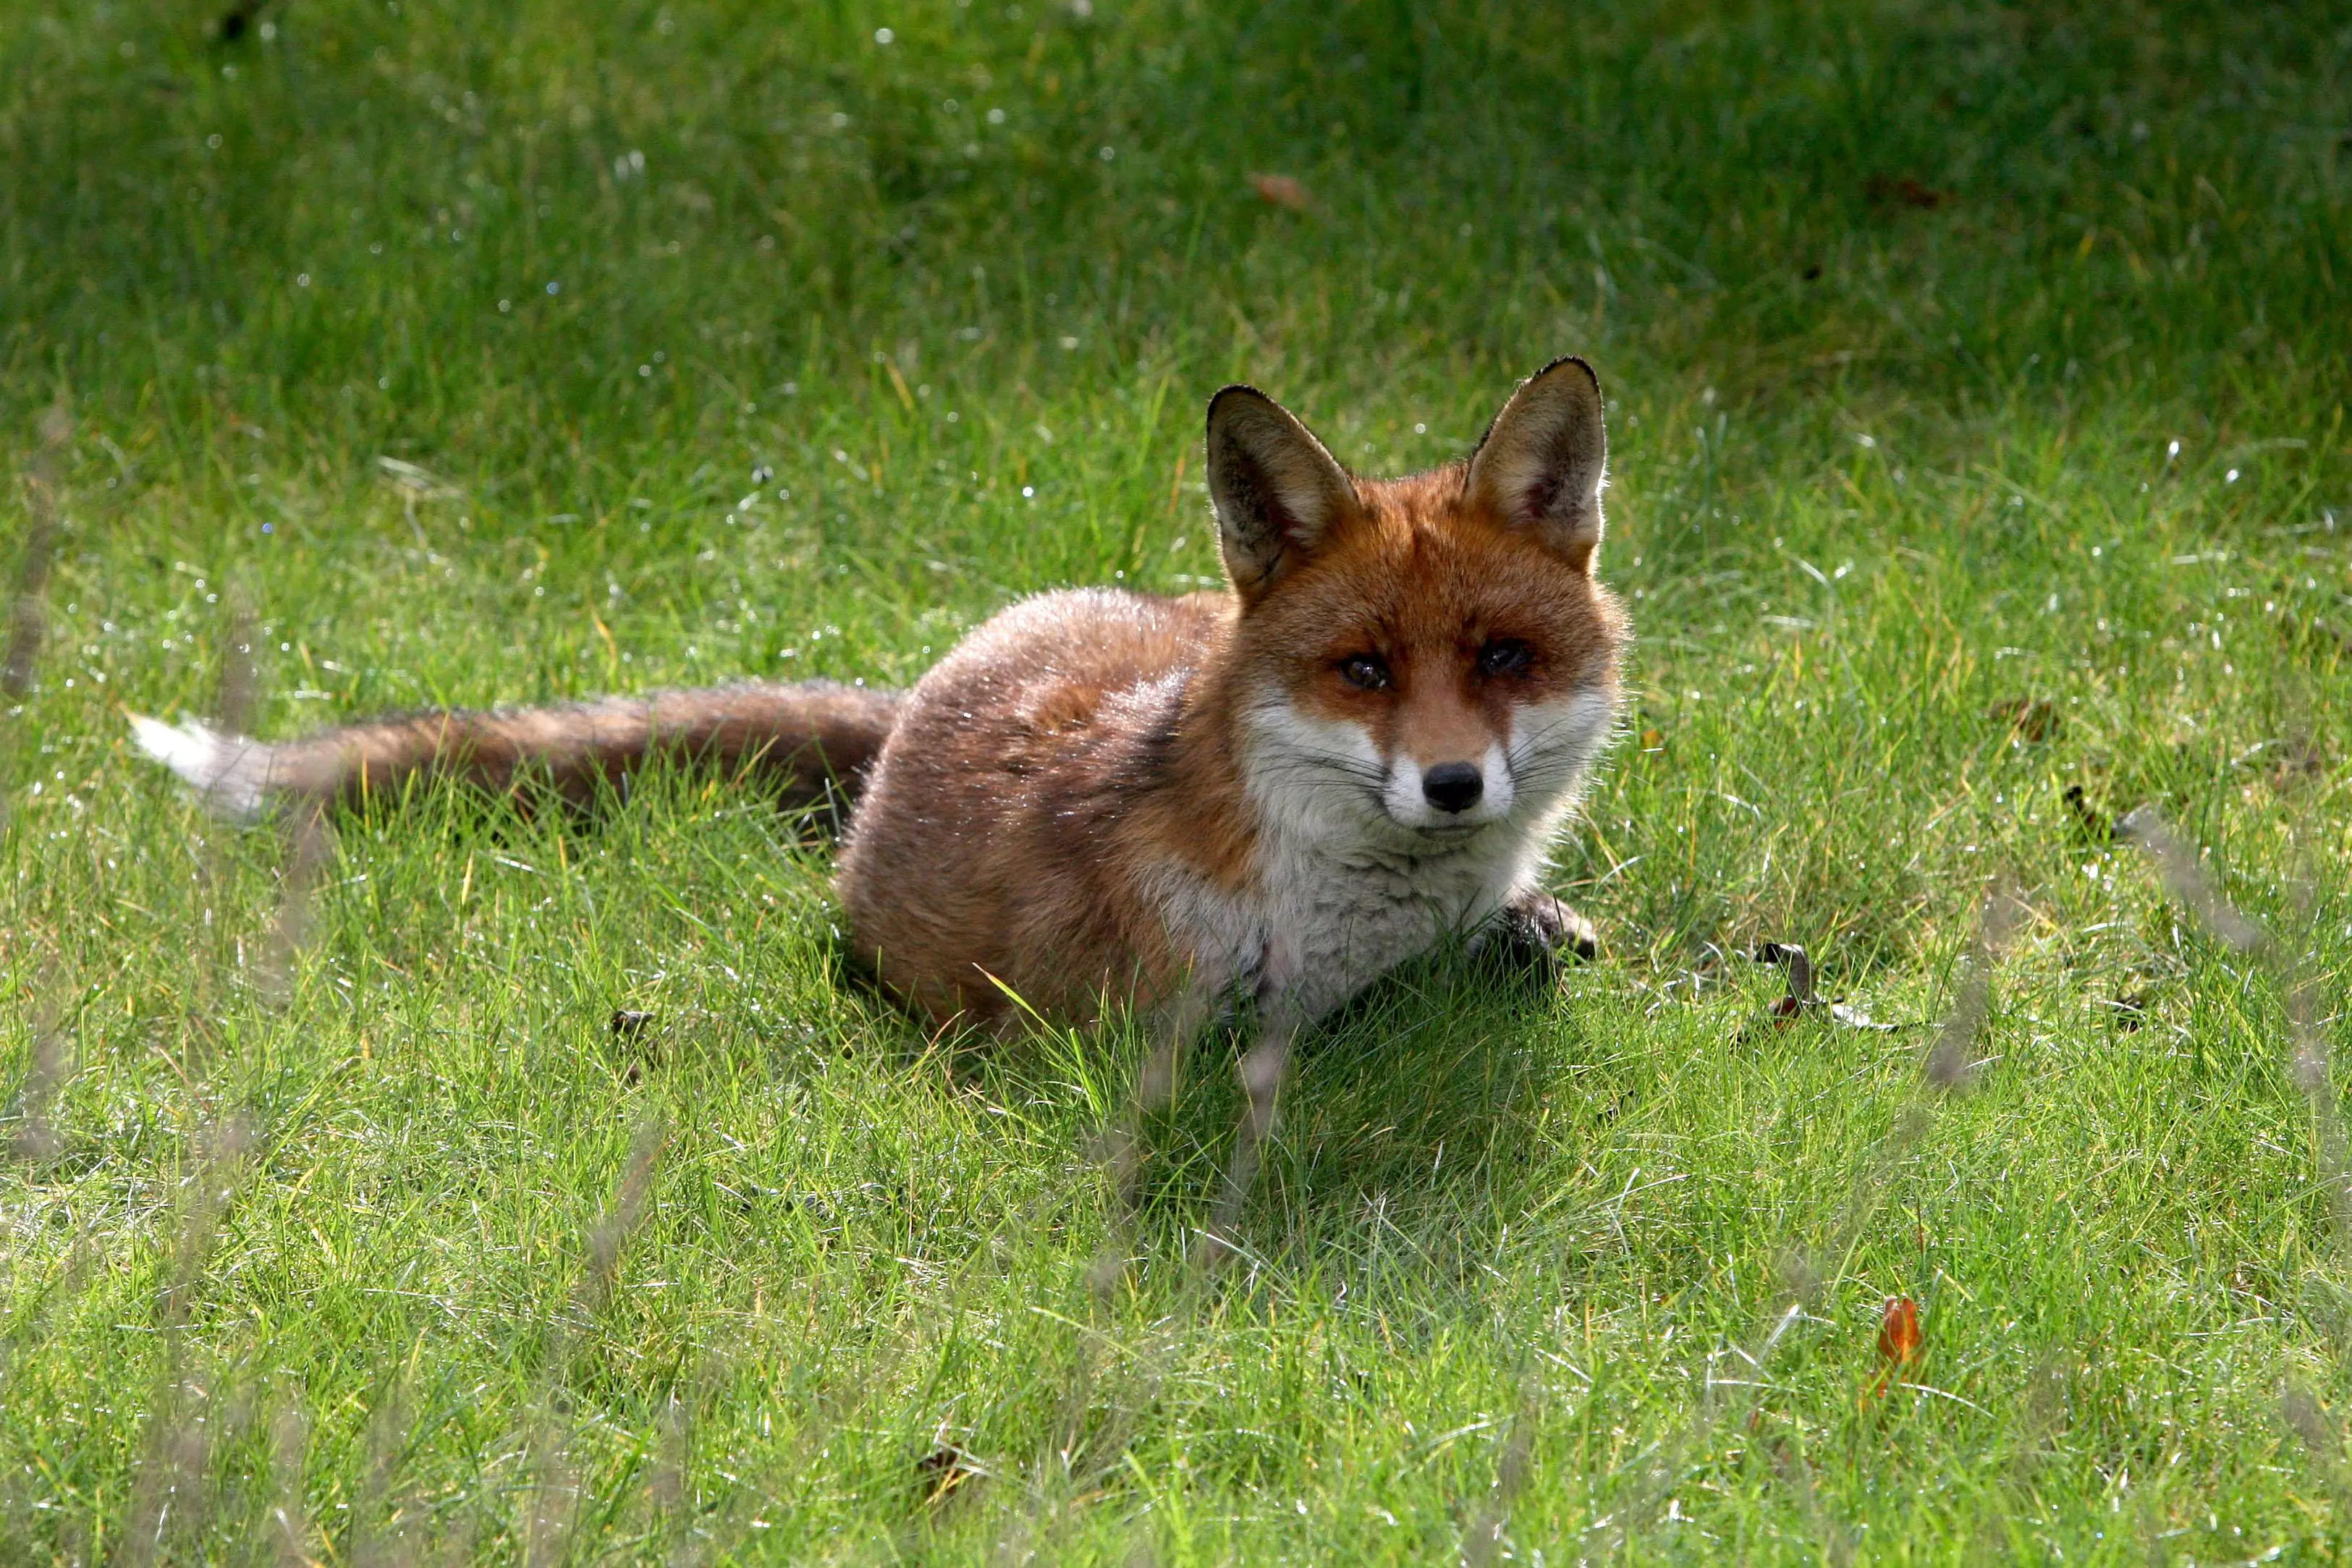 A fox (not this one) got into the hen house through an automatic door, which closed behind it.